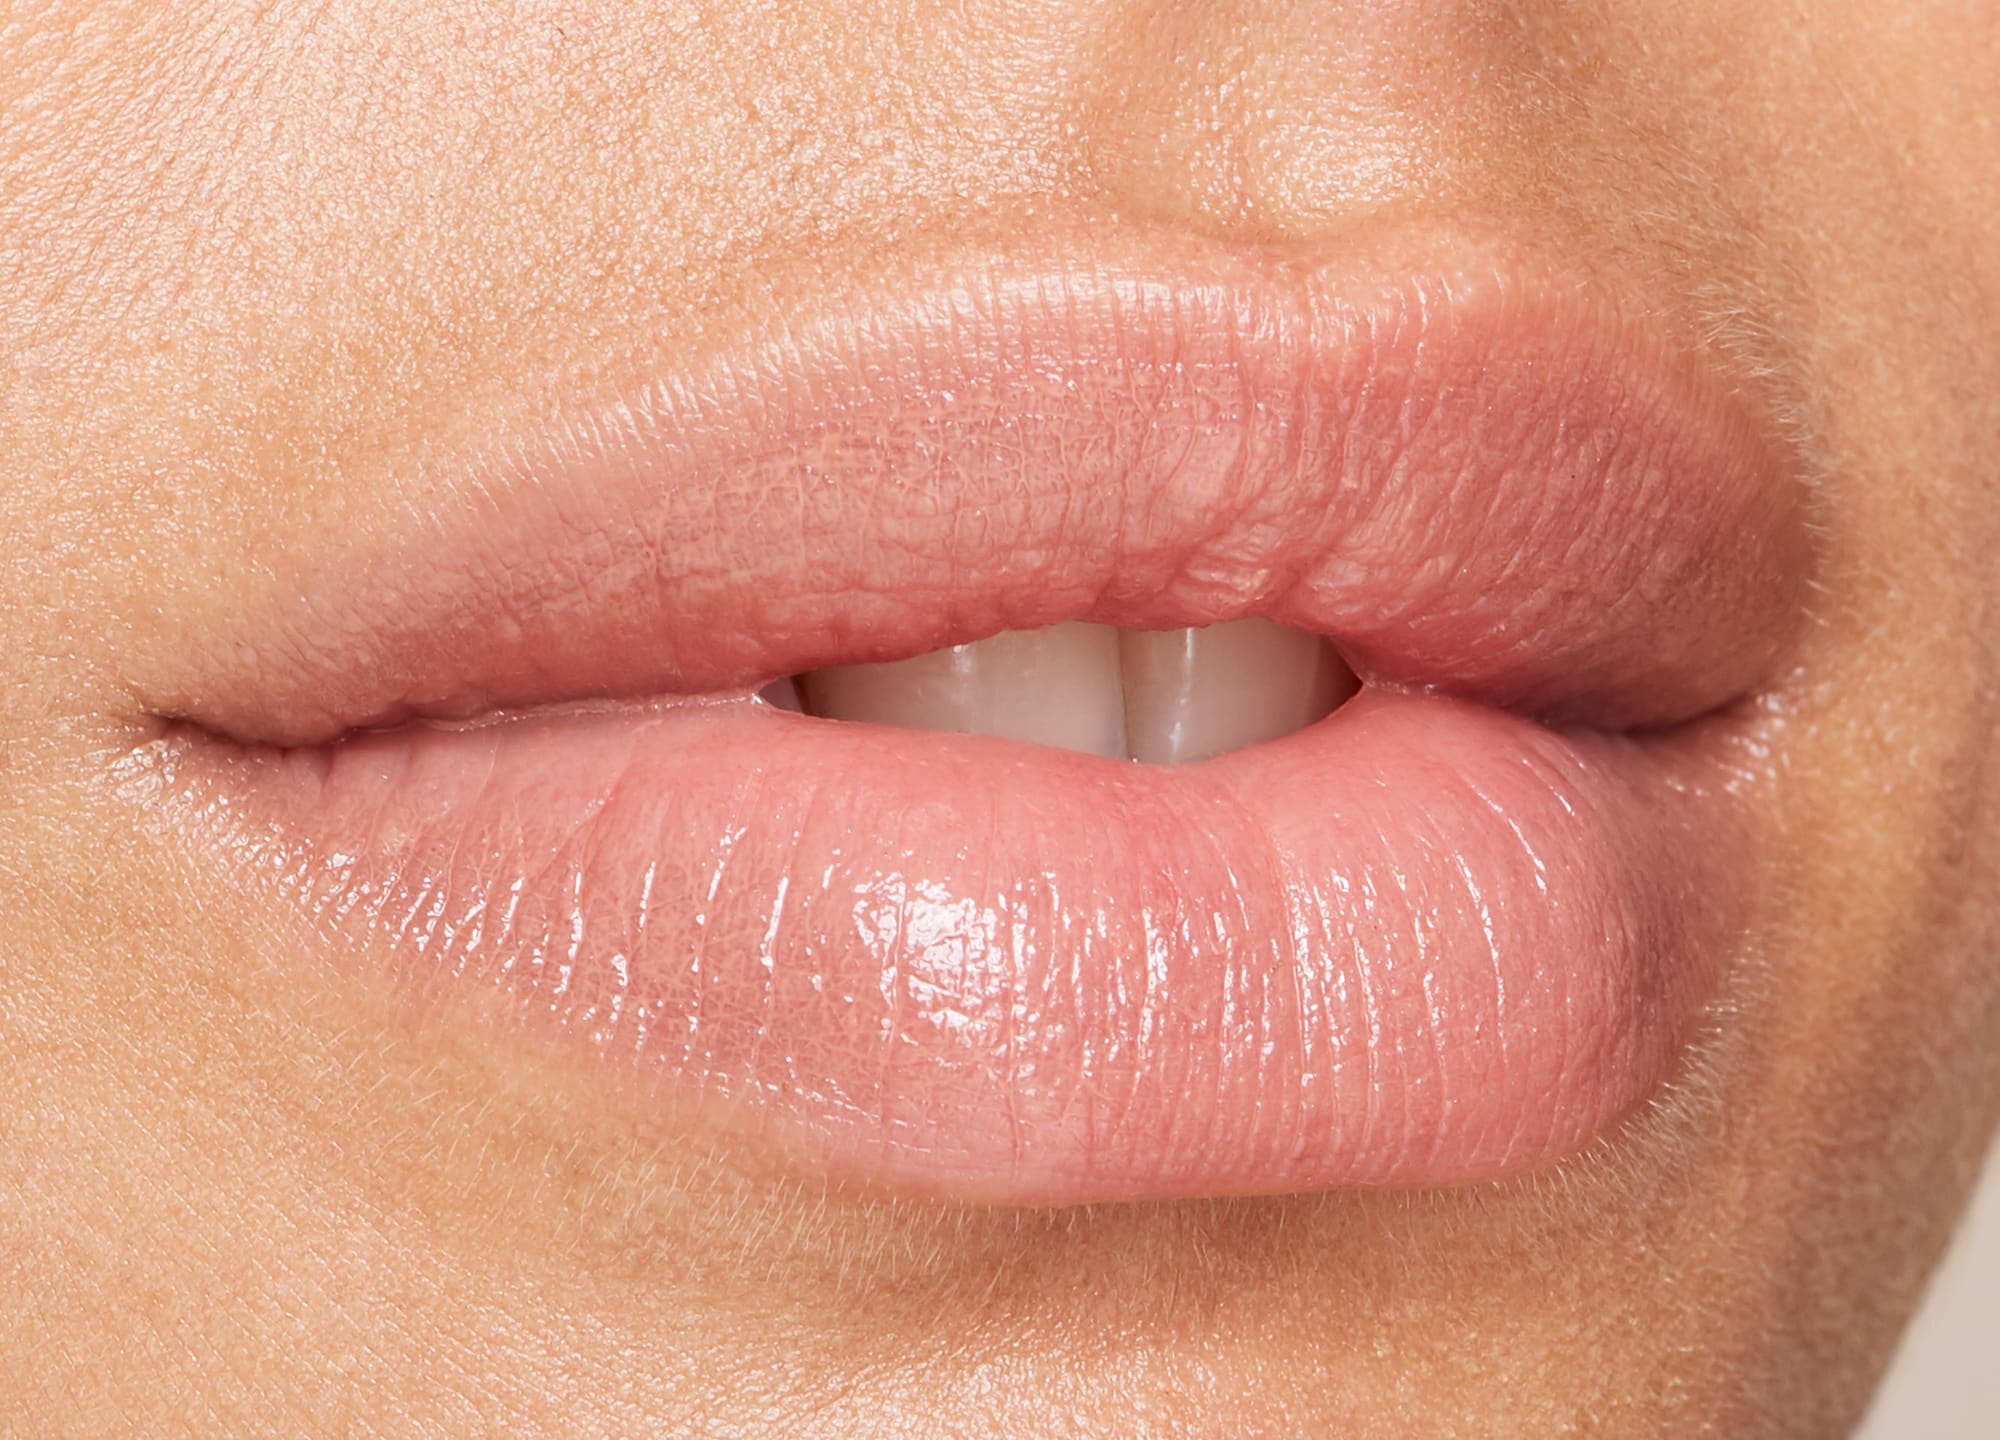 Wondering how to make your lip filler last longer? Learn what to do to amplify your lip filler results.